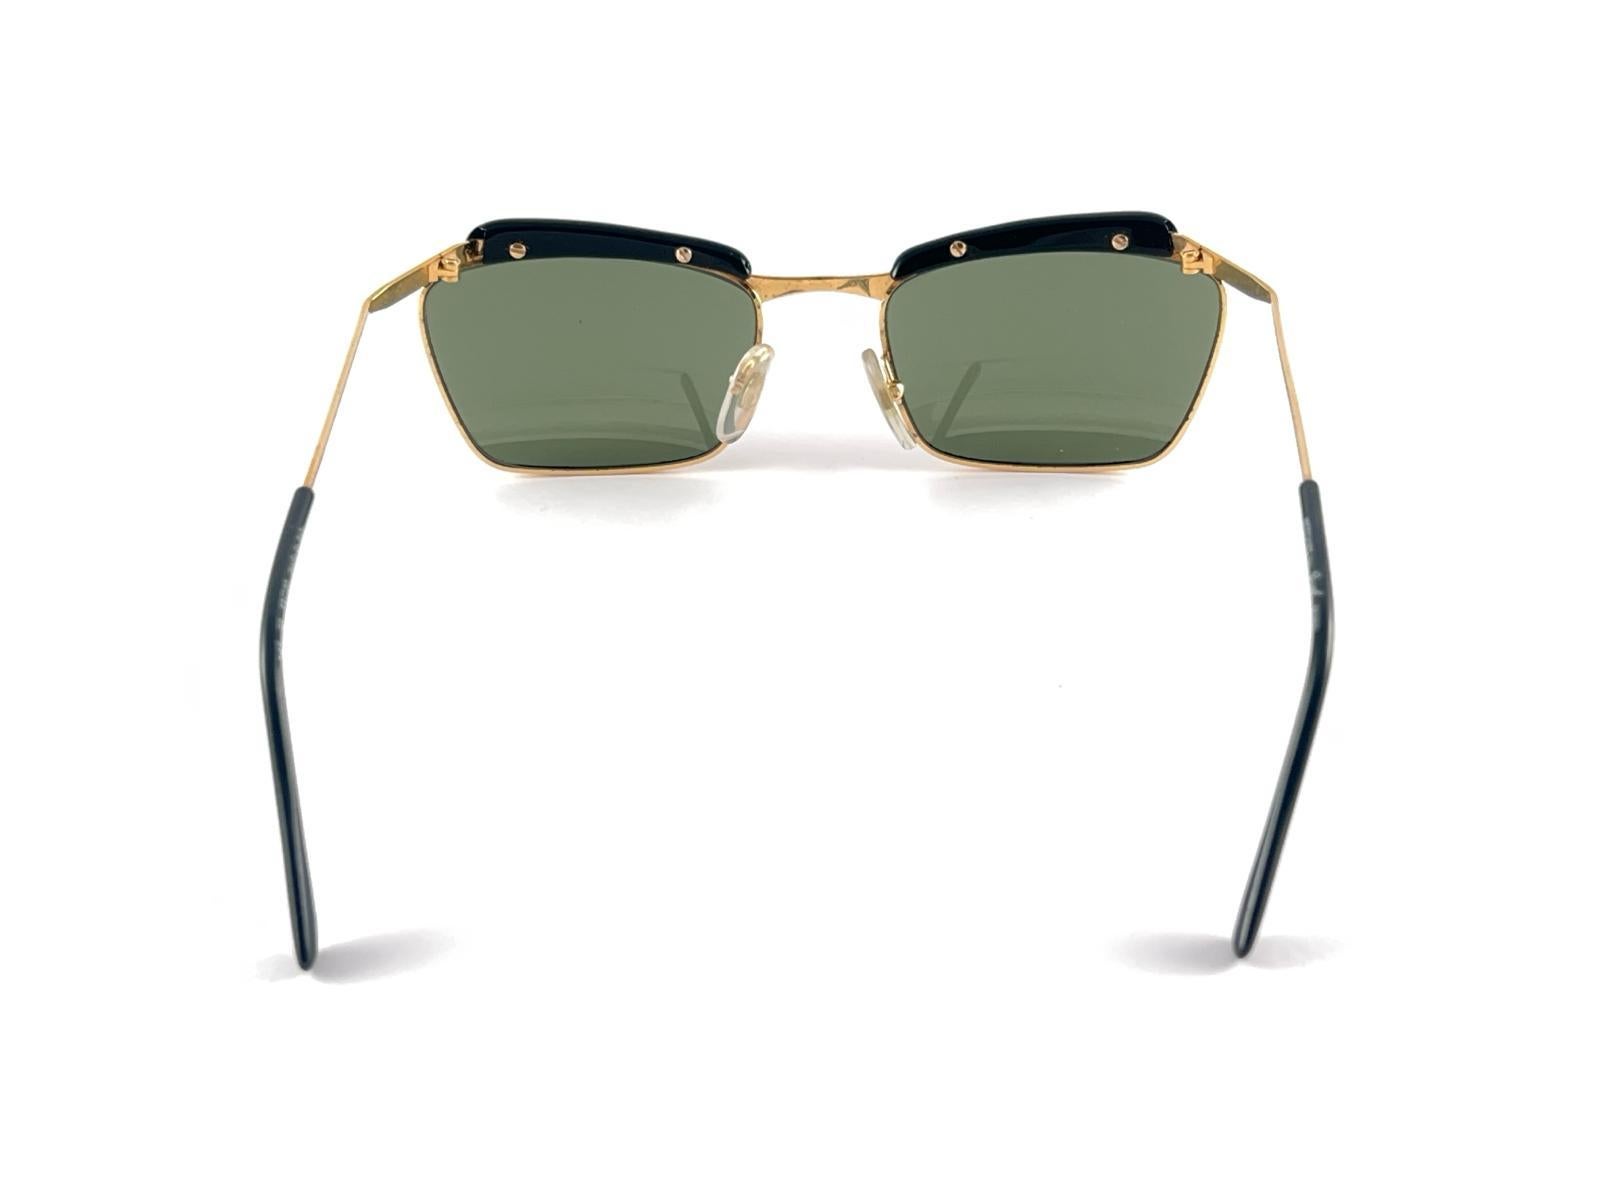 Vintage Moschino By Persol M260 Gold Frame Sunglasses 90'S Made in Italy For Sale 7